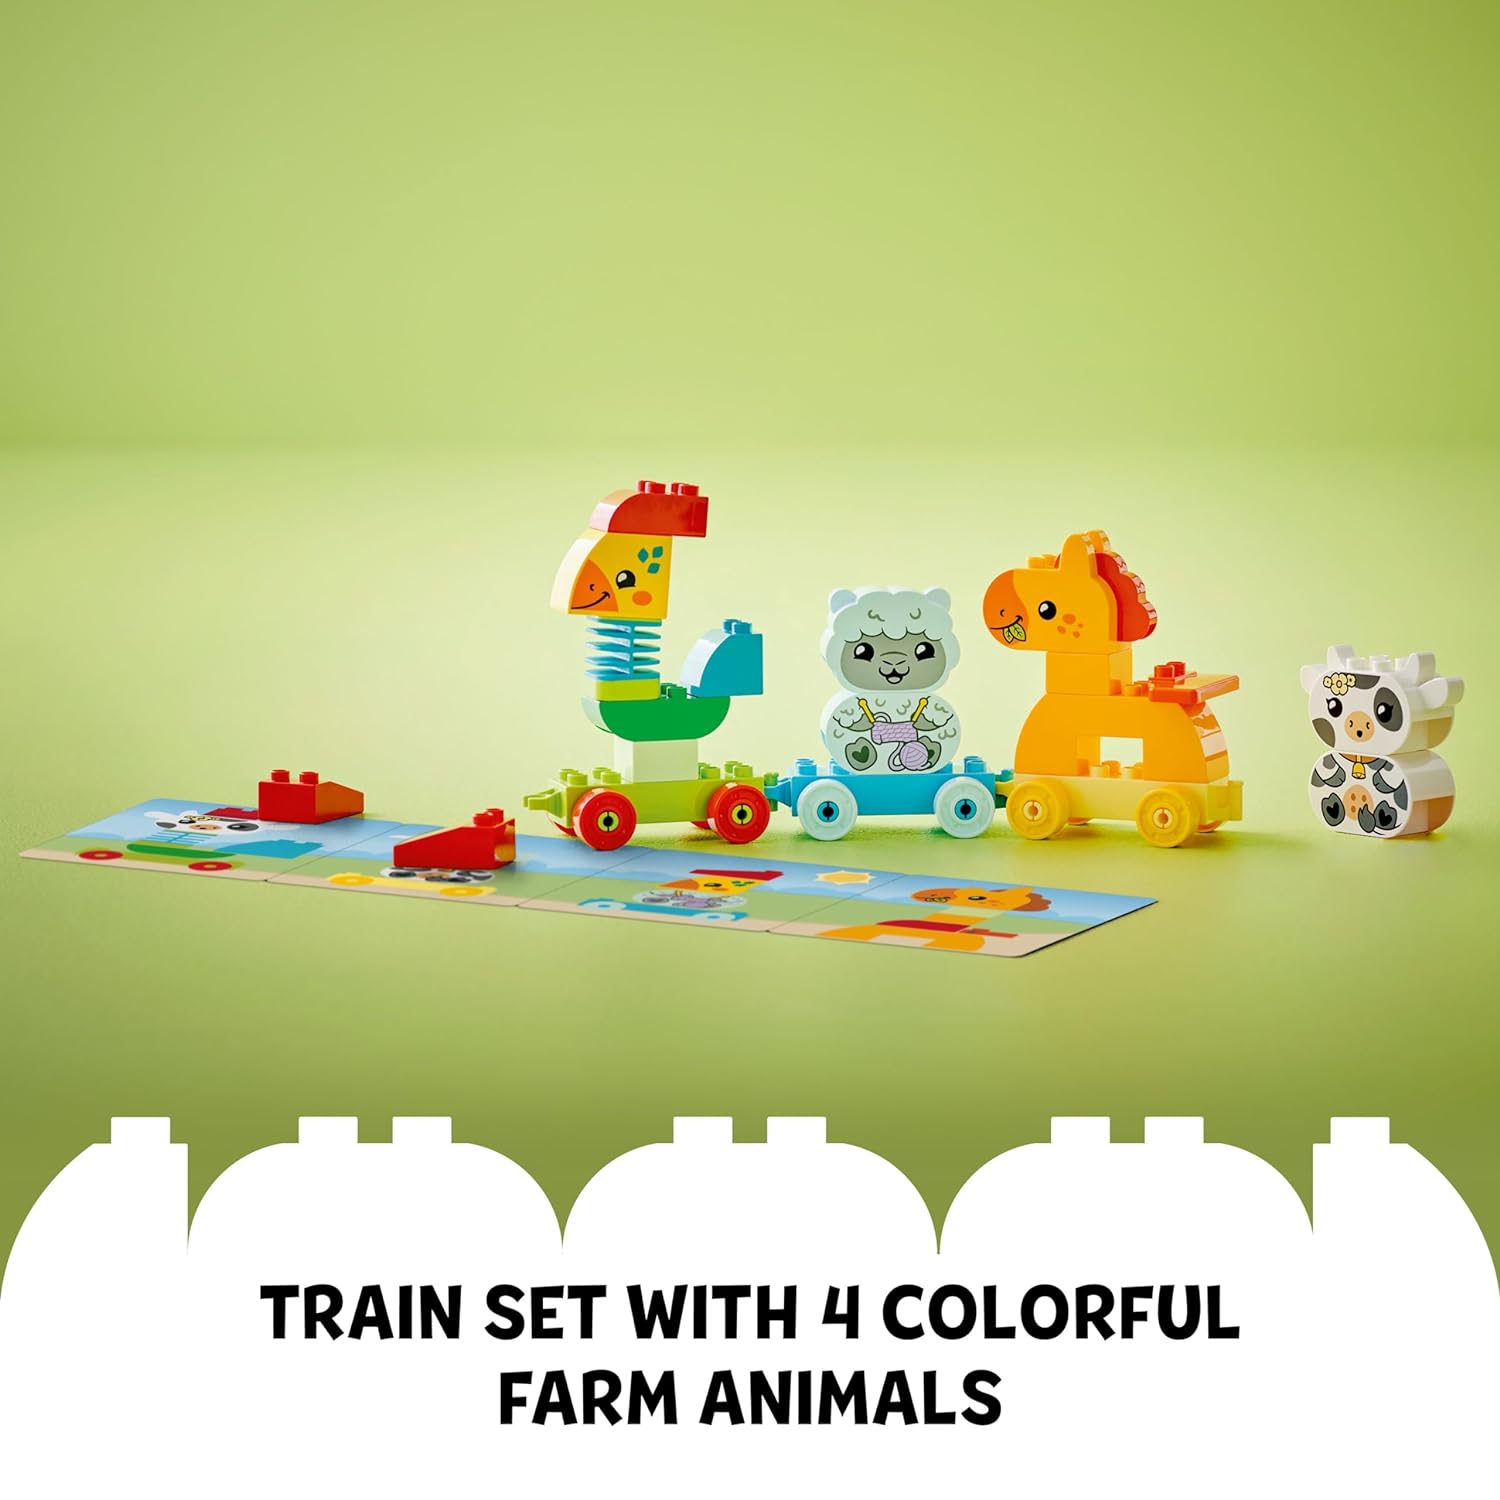 LEGO DUPLO My First Animal Train Nature Building Kit for Ages 2+